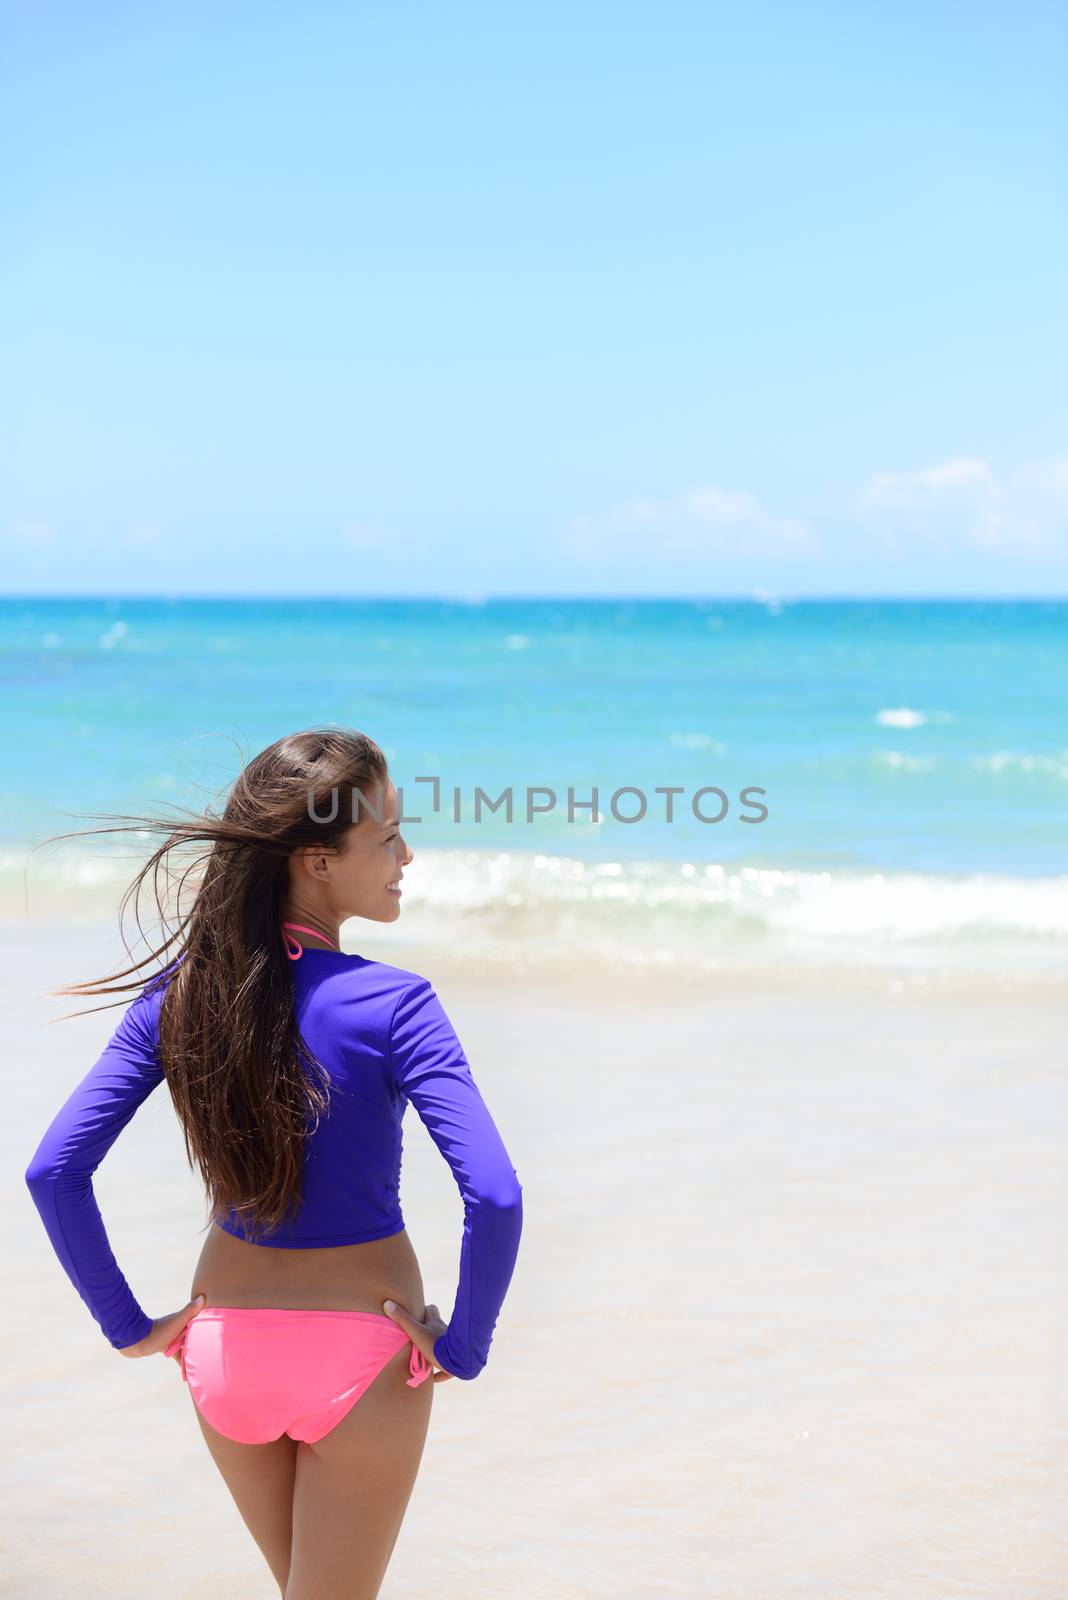 Woman relaxing on beach looking at the waves in sun protective swimwear t-shirt / rashguard to protect skin against rashes and uv rays during swimming or surfing.